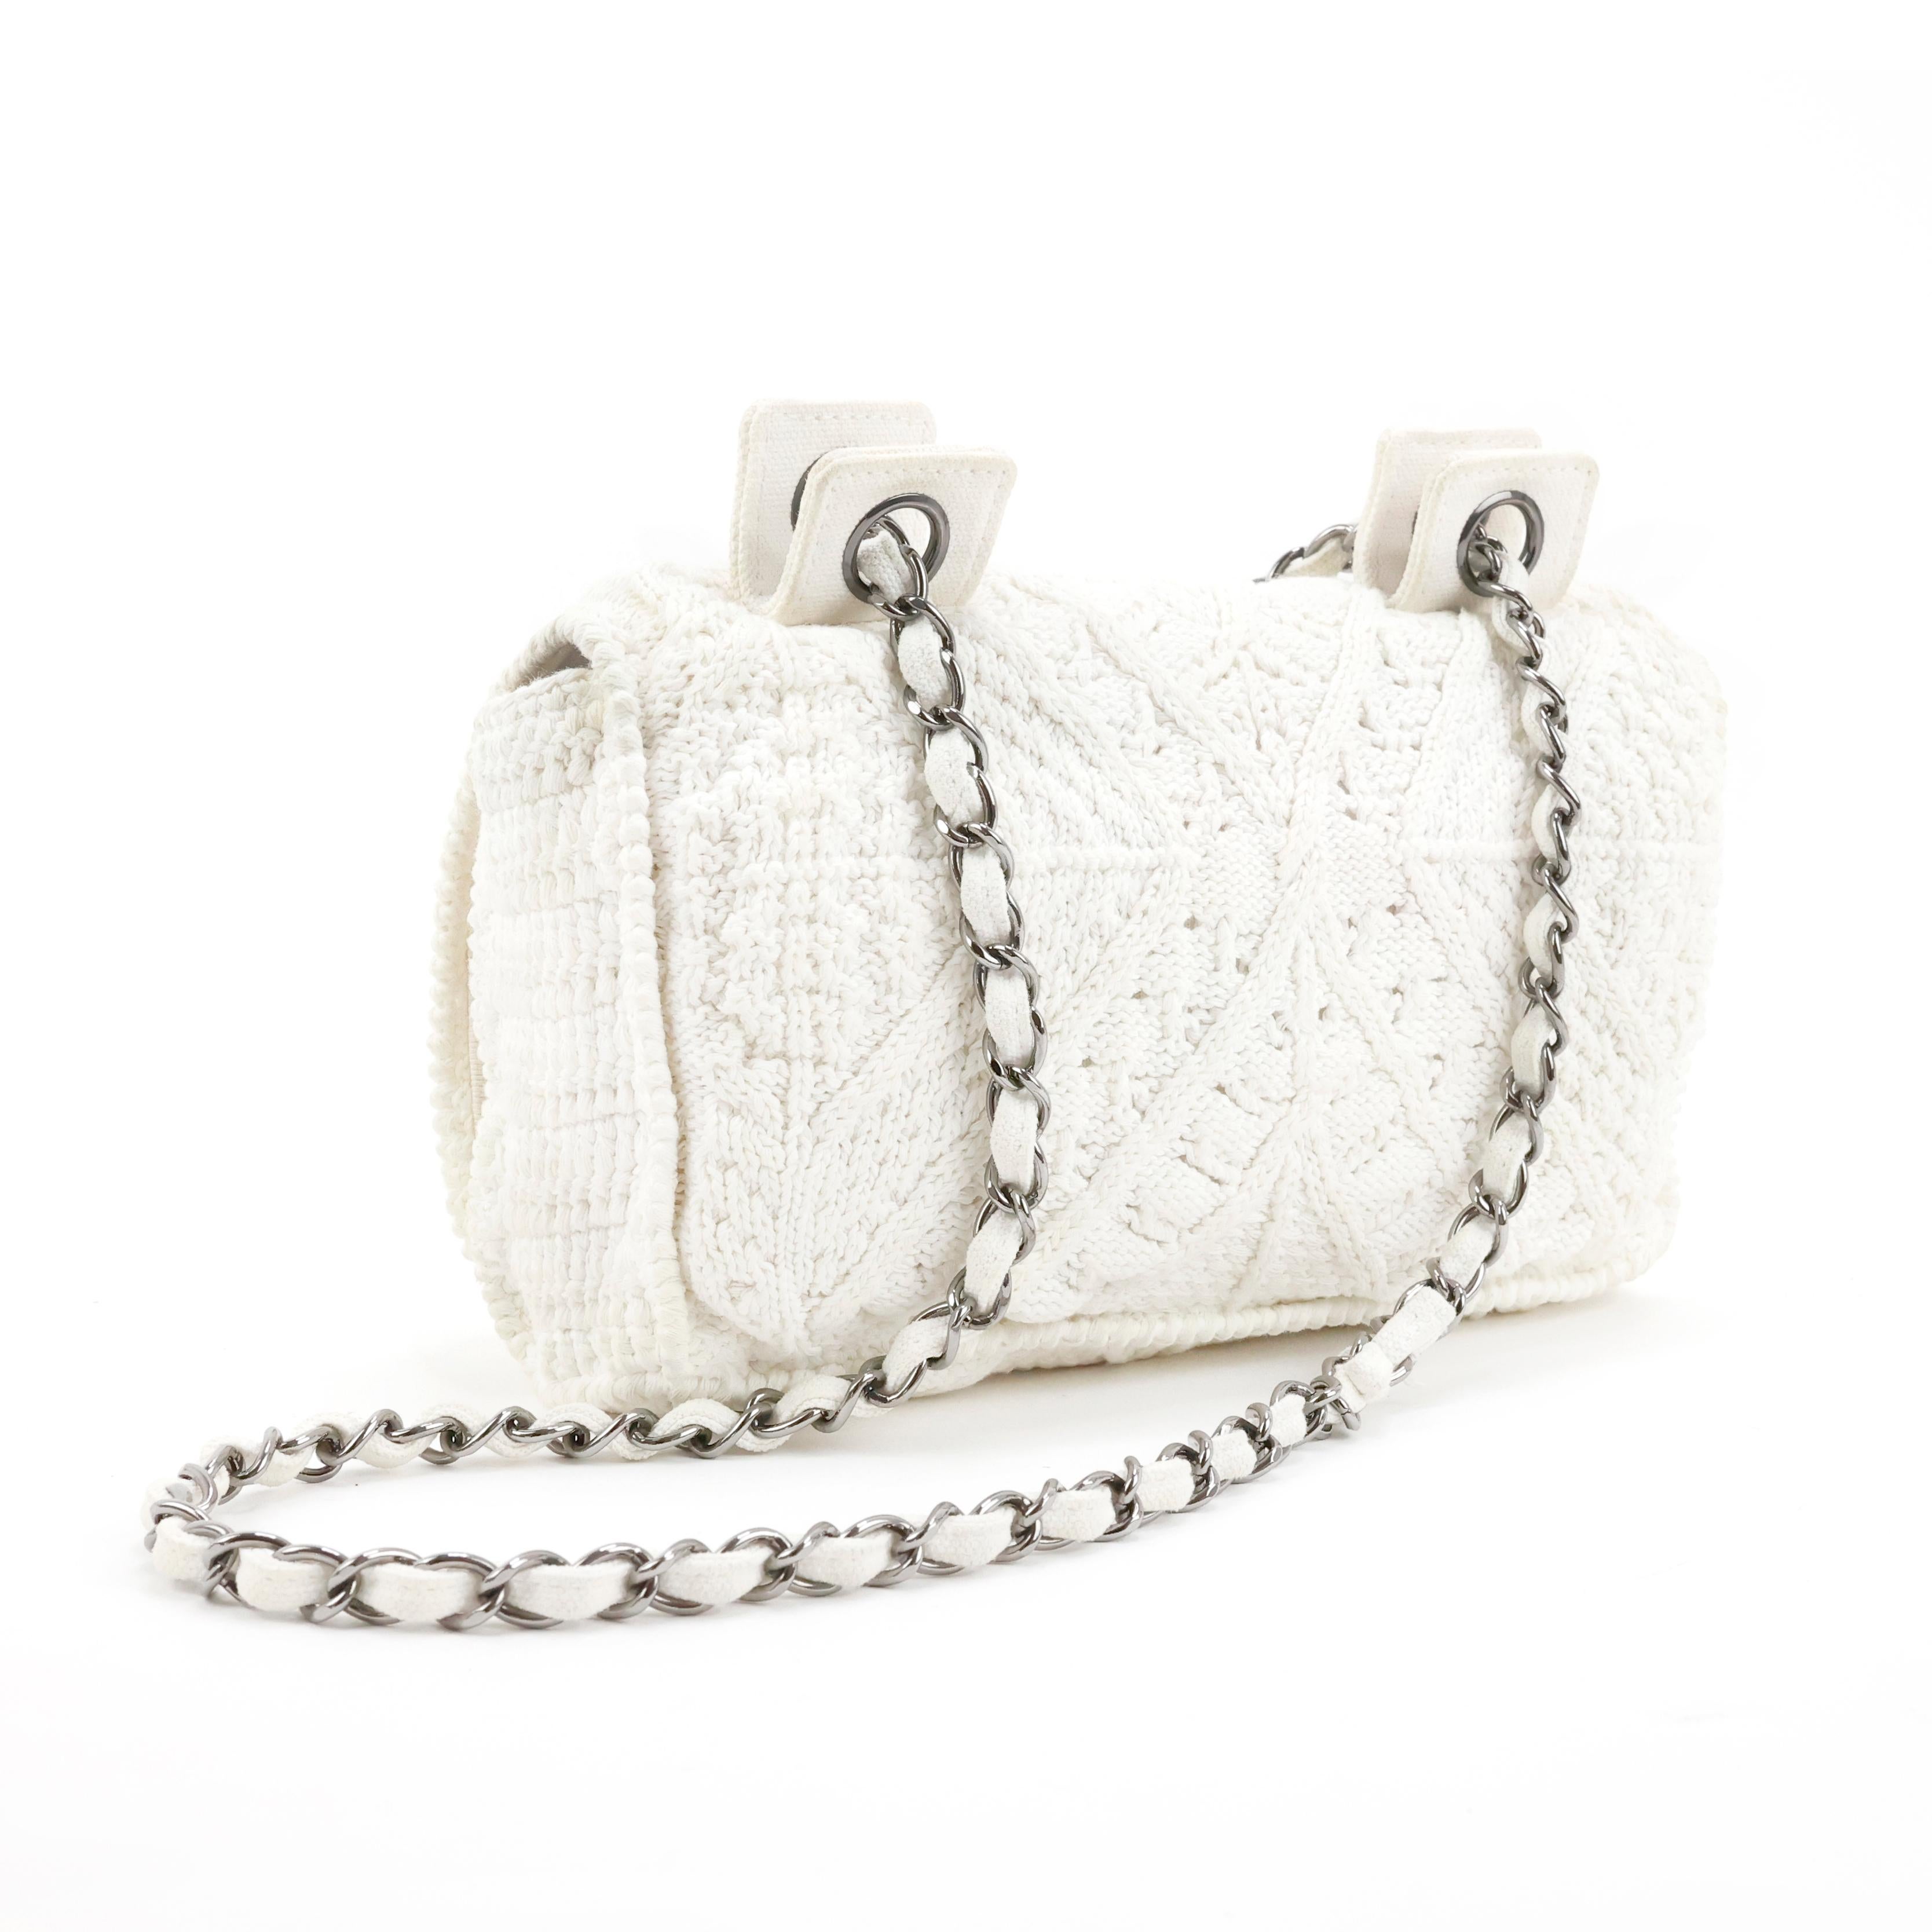 Chanel flap bag CC logo in crochet fabric color white, silver hardware.

Condition:
Really good, to note: slight yellowing on fabric.

Packing/accessories:
Dustbag.

Measurements:
23cm x 14cm x 8cm